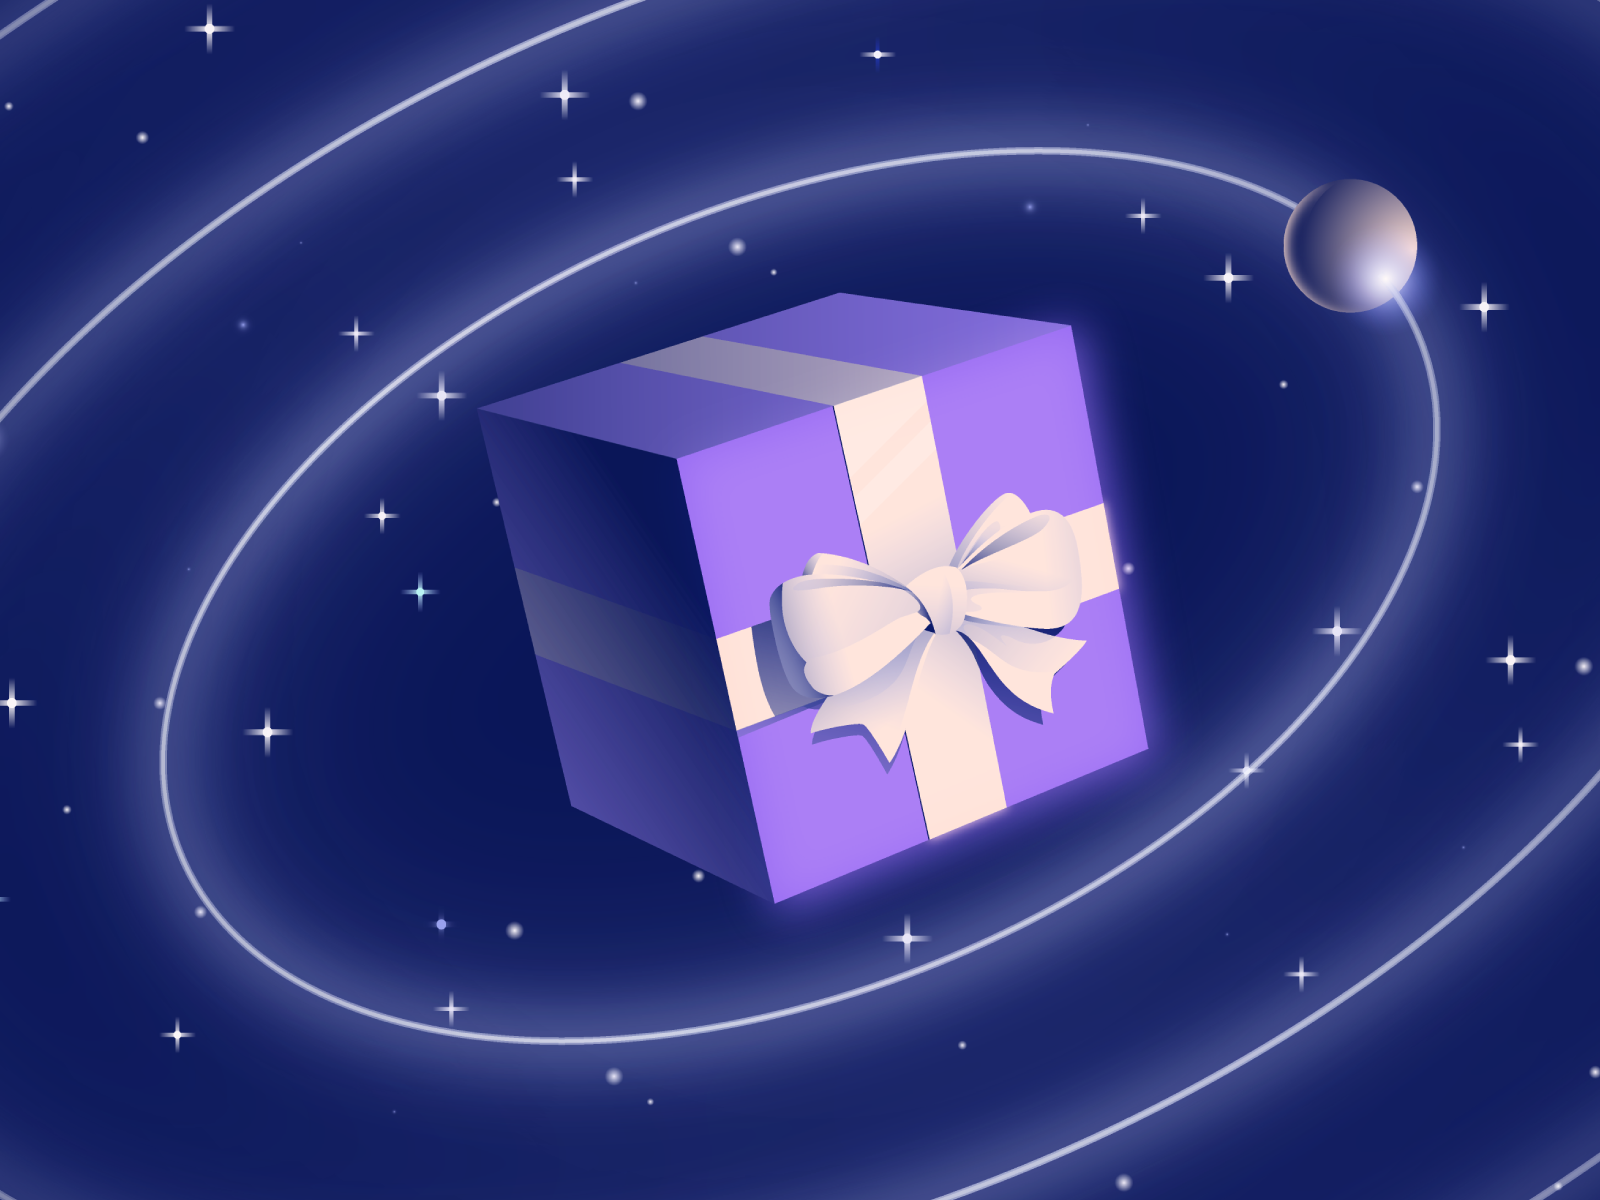 Lightyear - Present Email Illustration 05 app illustrtion email finance financial app floating geometric shapes gift gift box giveaway glow hellsjells investing investment app light marketing illustration orbit present ribbon space stars